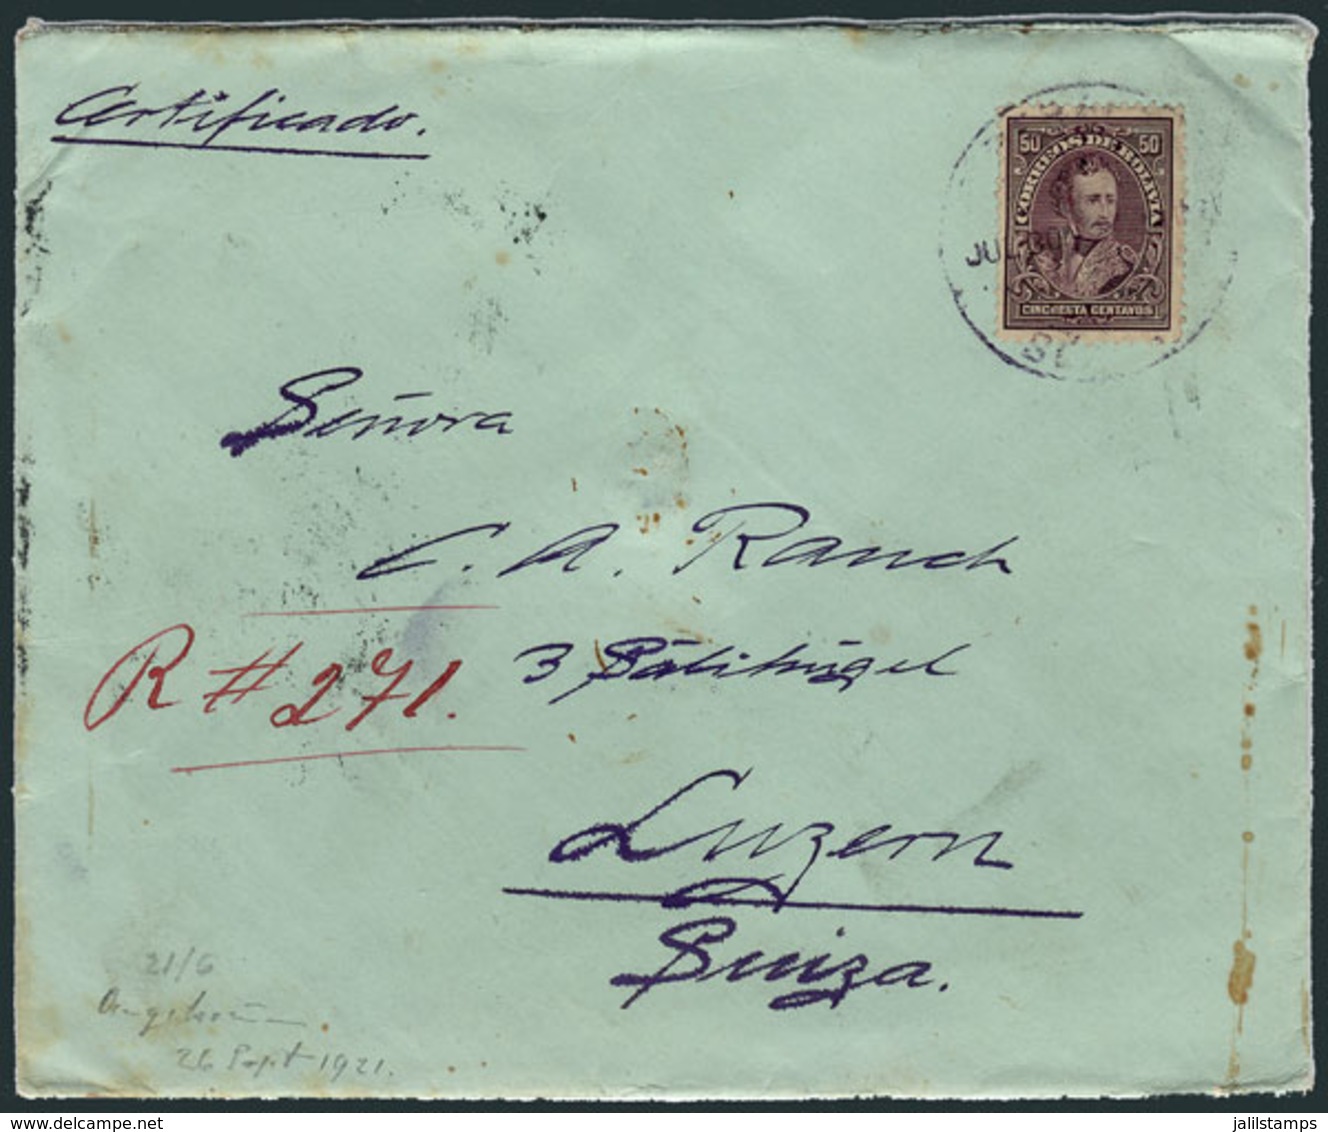 BOLIVIA: Registered Cover Franked By Sc.108 (Sucre 50c. Violet) ALONE, Sent From Beni To Switzerland On 30/JUL/1901, VF  - Bolivia